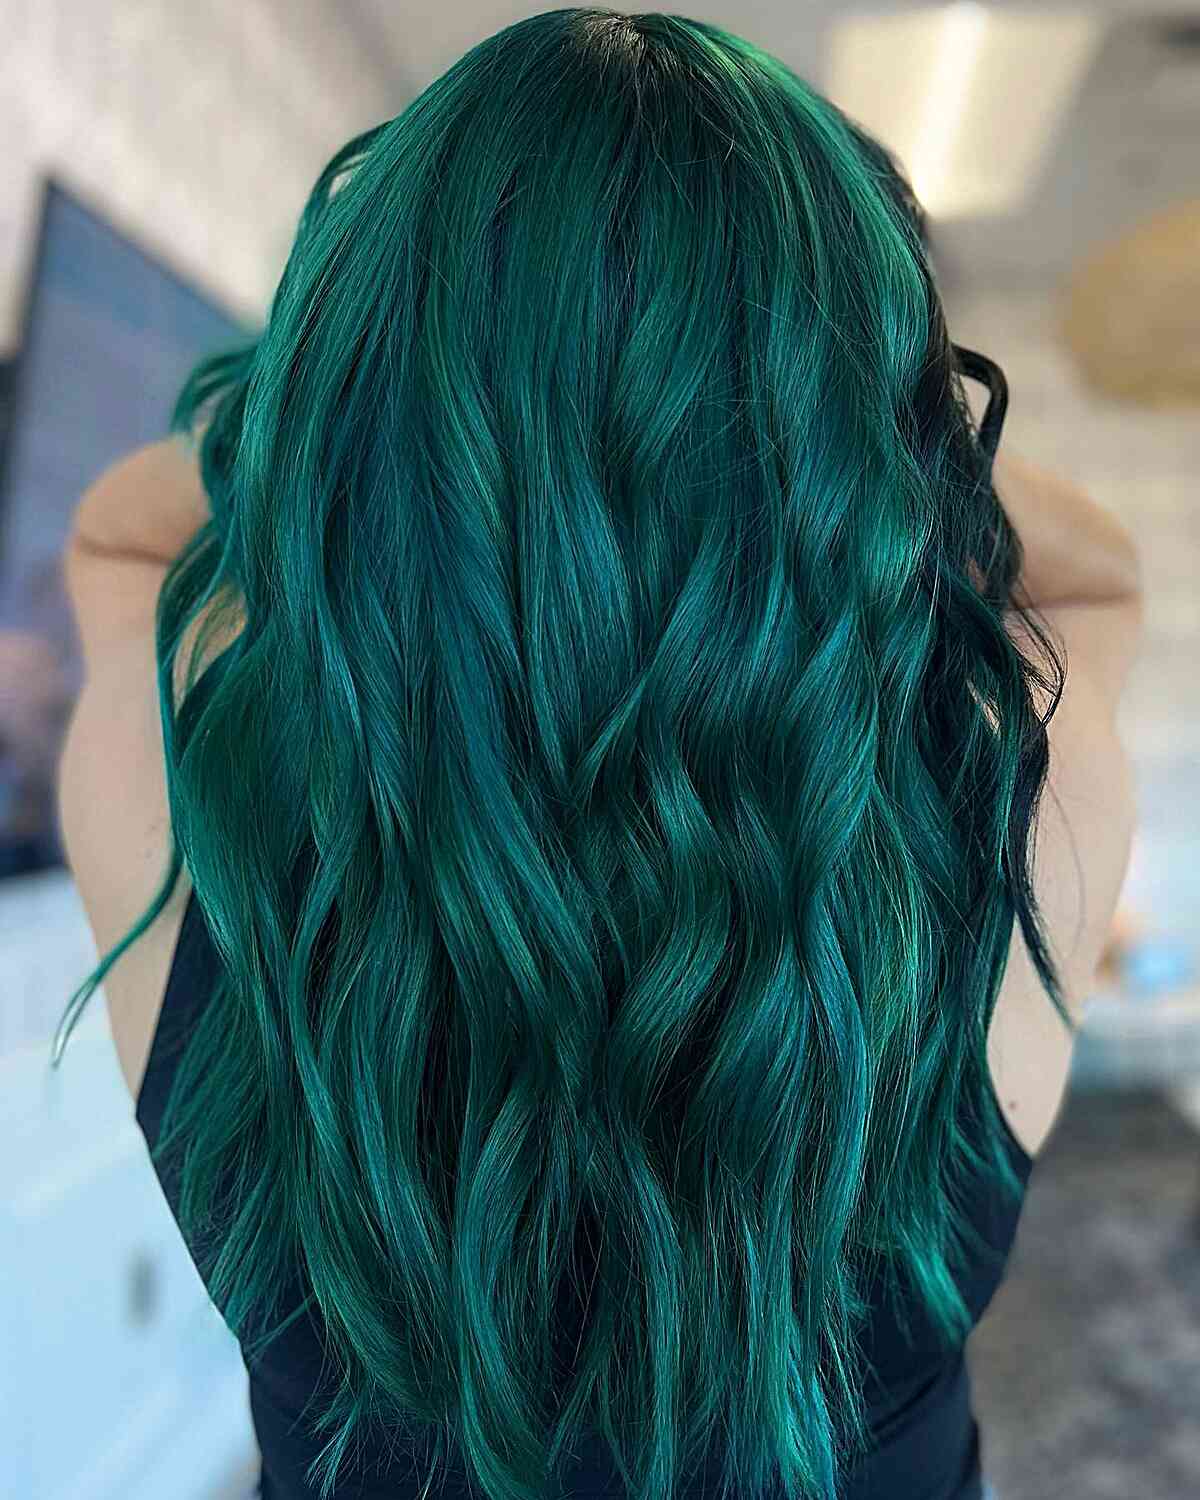 The Perfect Emerald Green Hair